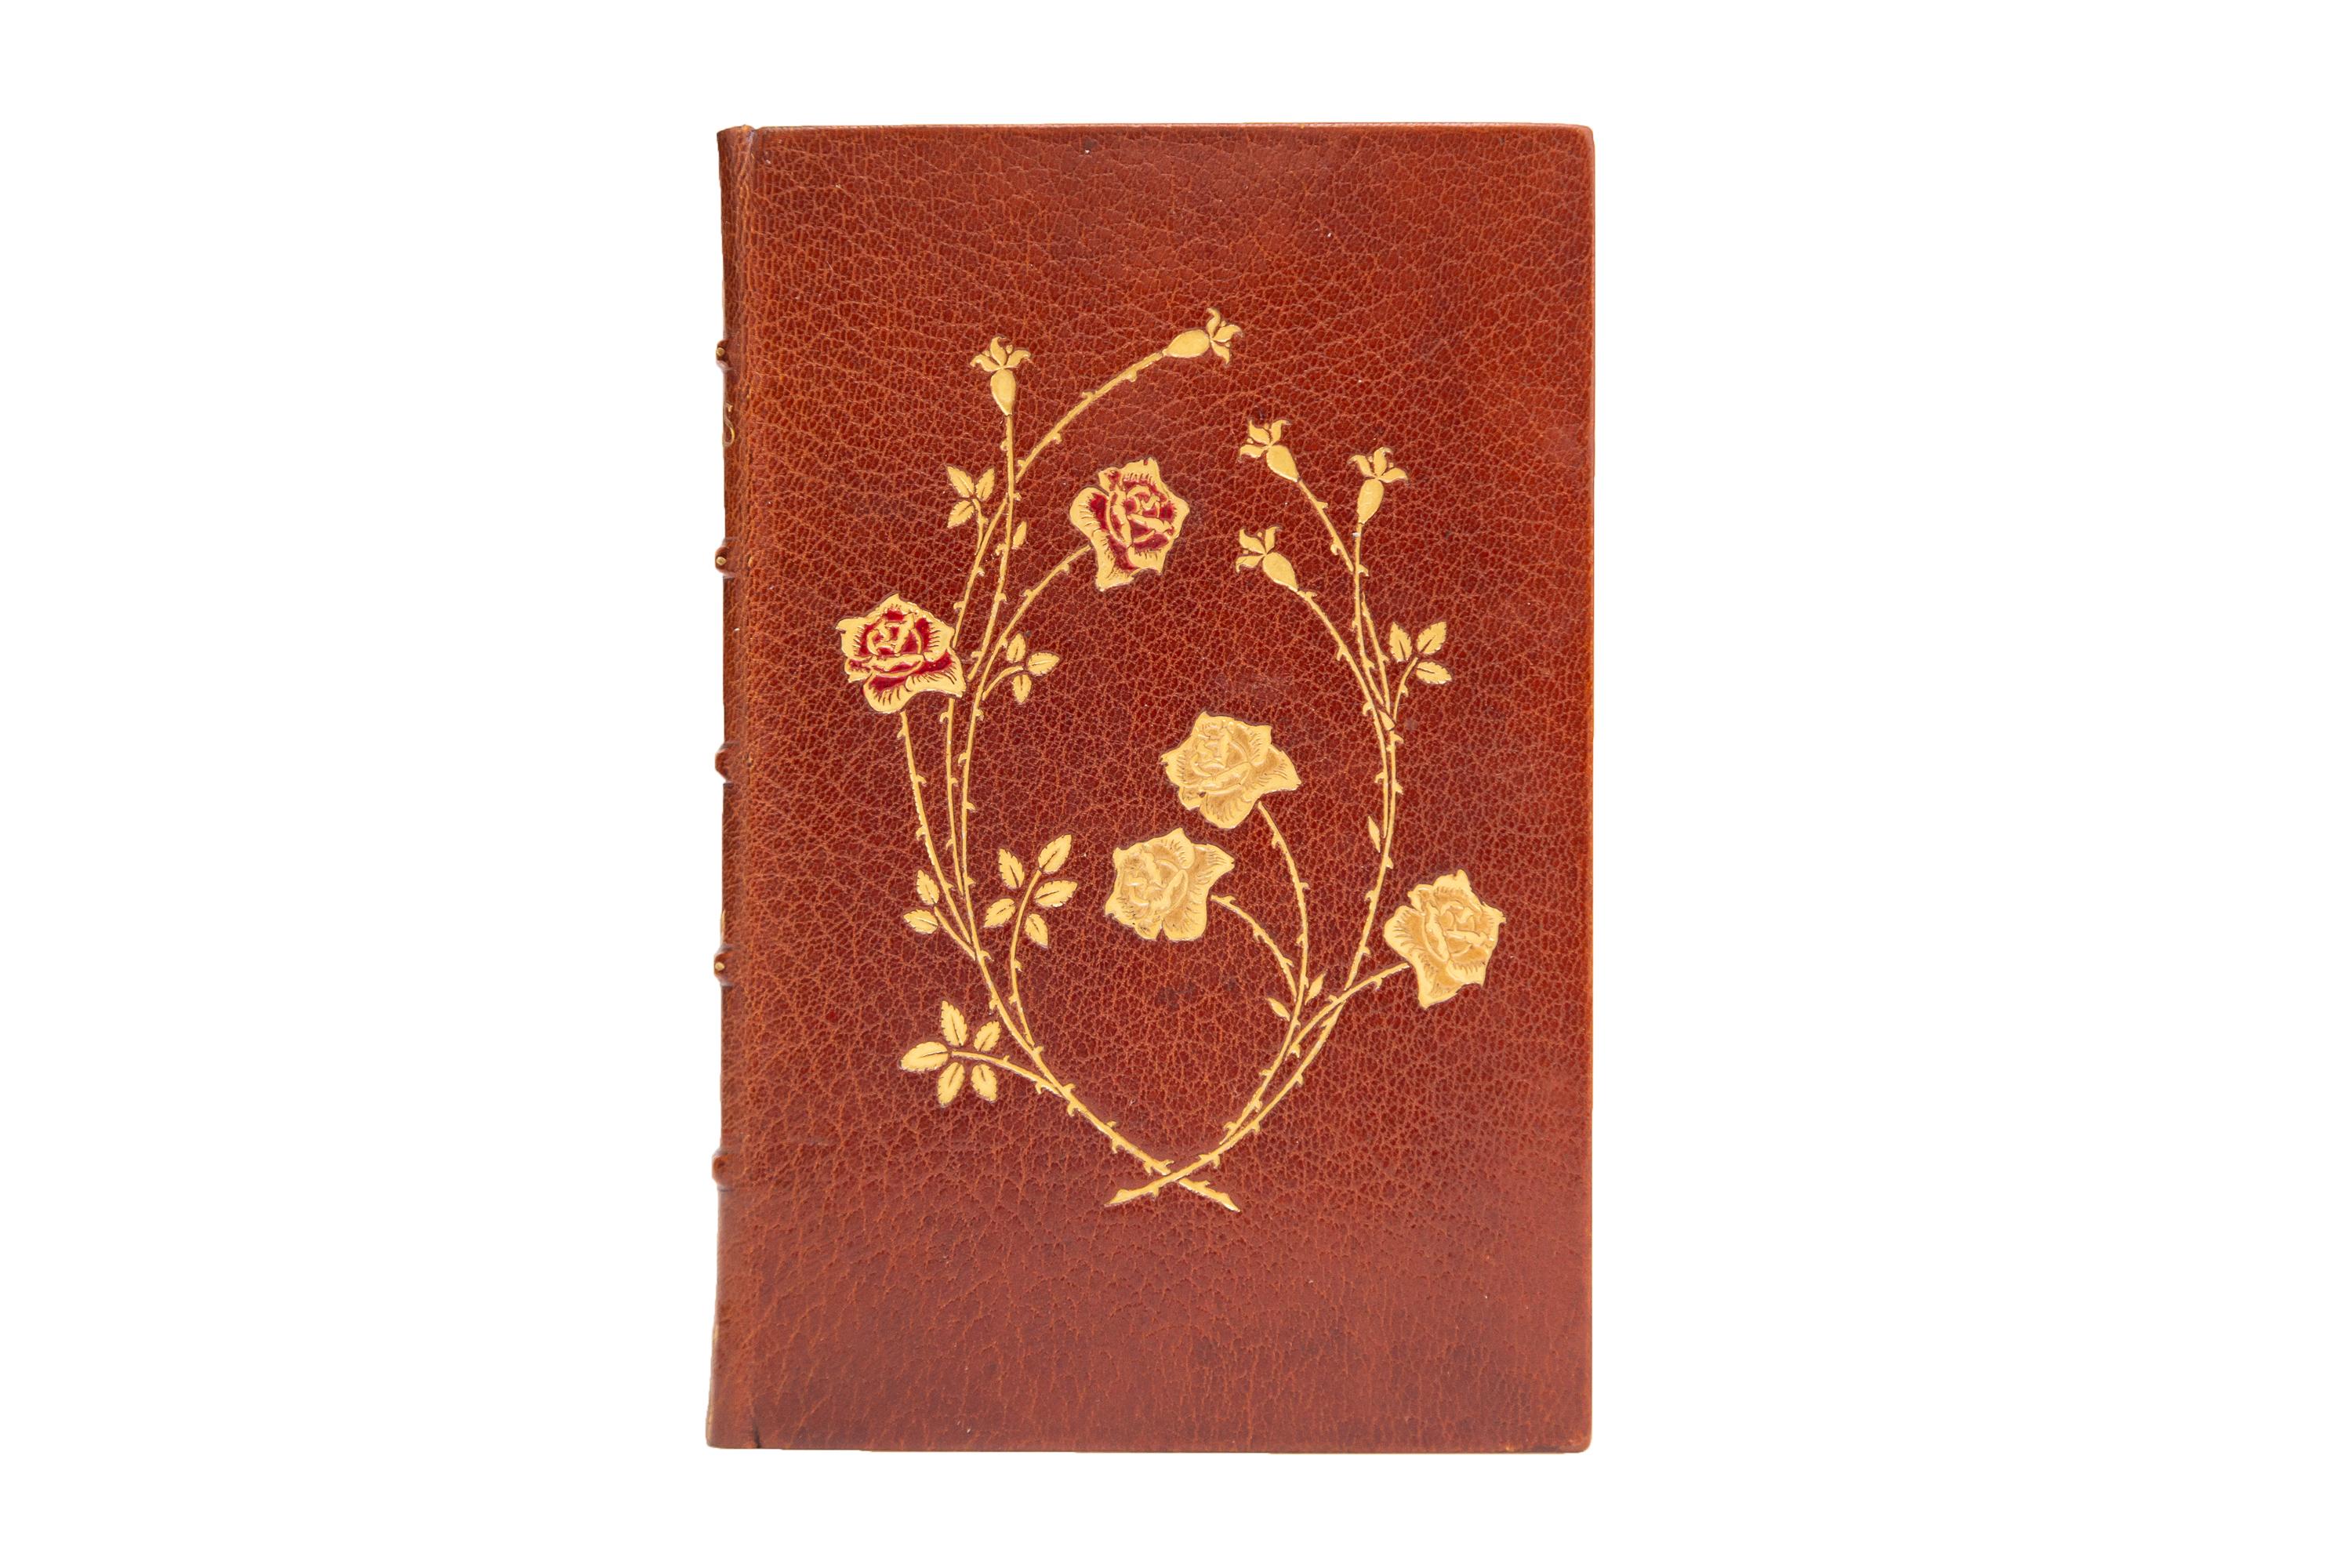 1 Volume. Alfred Lord Tennyson, The Works. Bound in full brown morocco with the front cover displaying beautiful flowers in gilt tooling, red, and white inlay. Raised bands gilt with panels displaying gilt, red, and white inlay flowers as well as